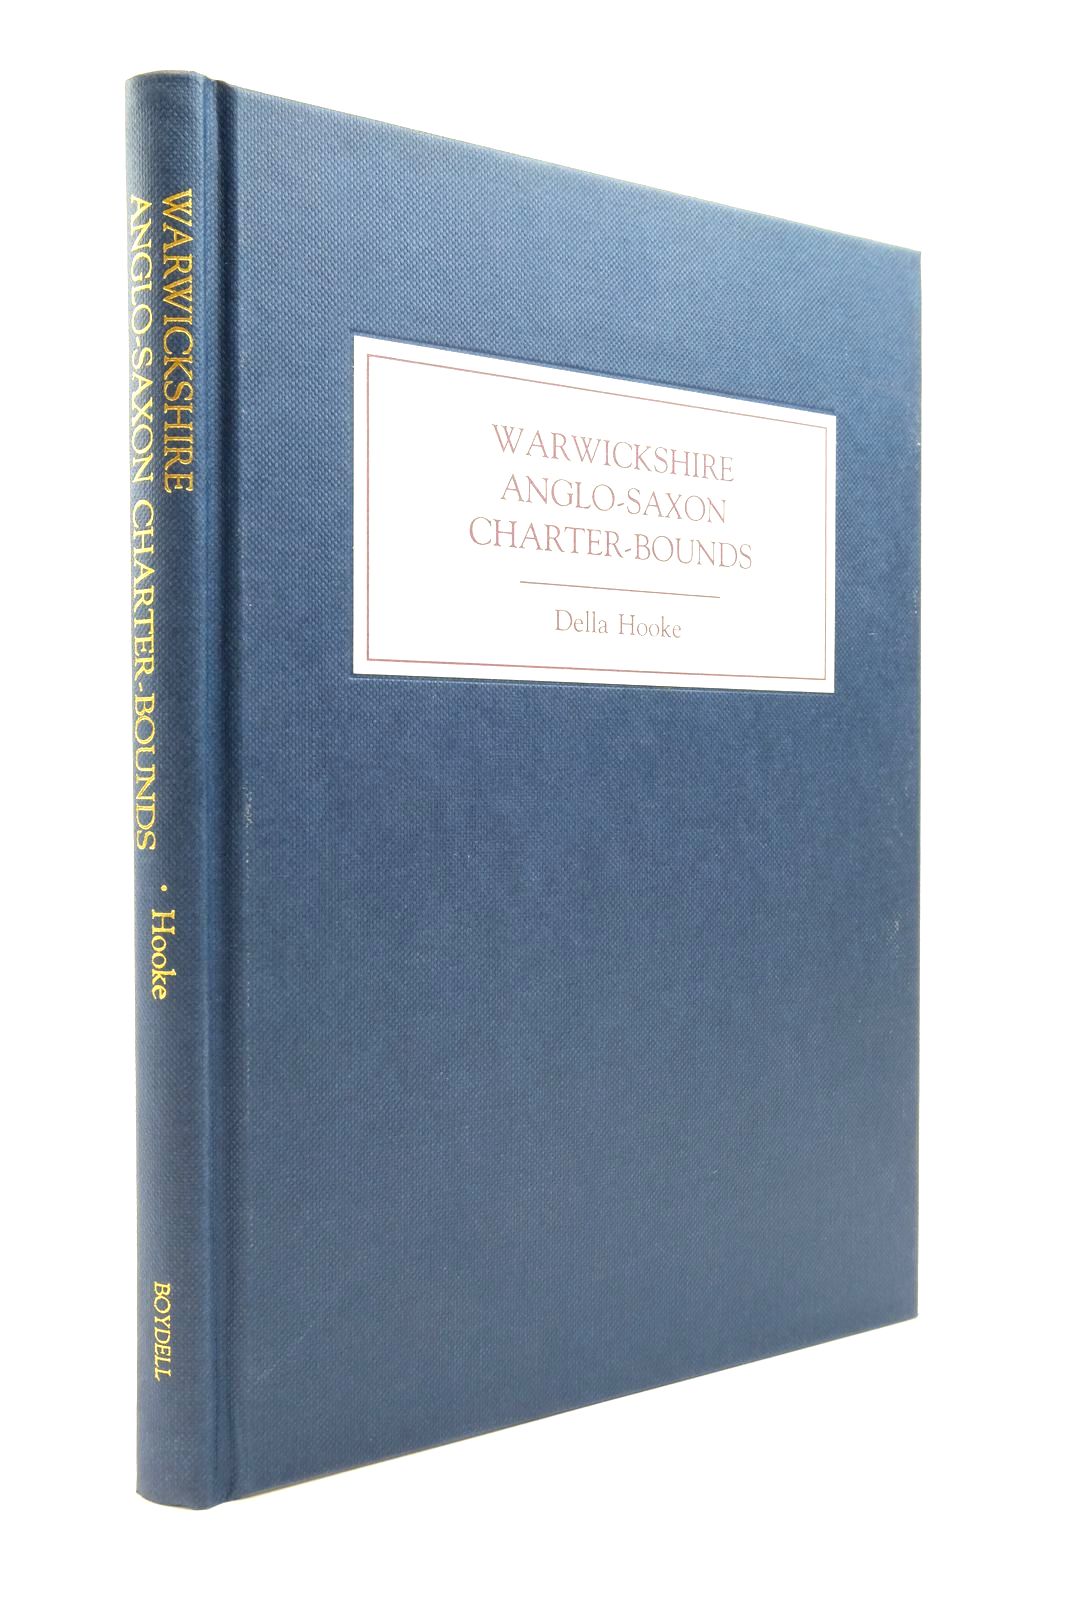 Photo of WARWICKSHIRE ANGLO-SAXON CHARTER BOUNDS written by Hooke, Della published by The Boydell Press (STOCK CODE: 2138772)  for sale by Stella & Rose's Books